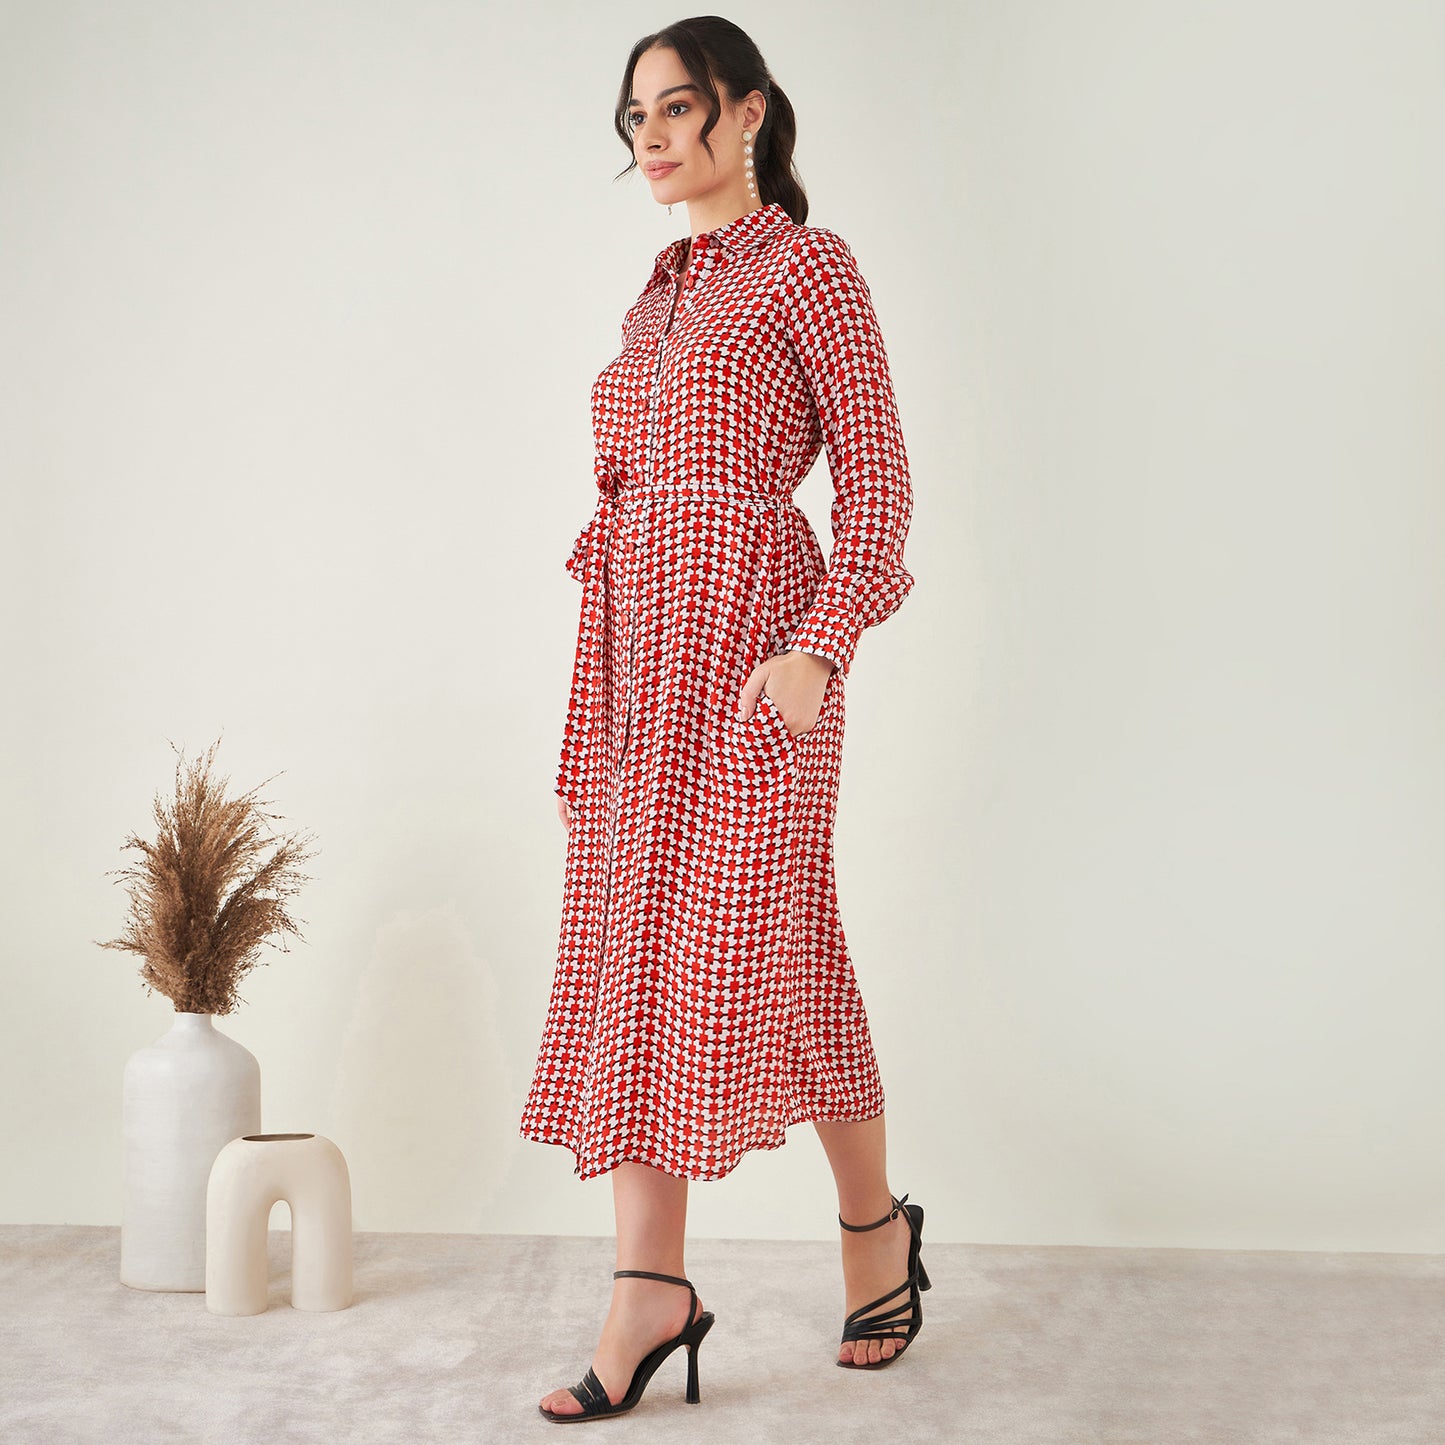 Red and White Geometric Print Shirt Dress with Belt